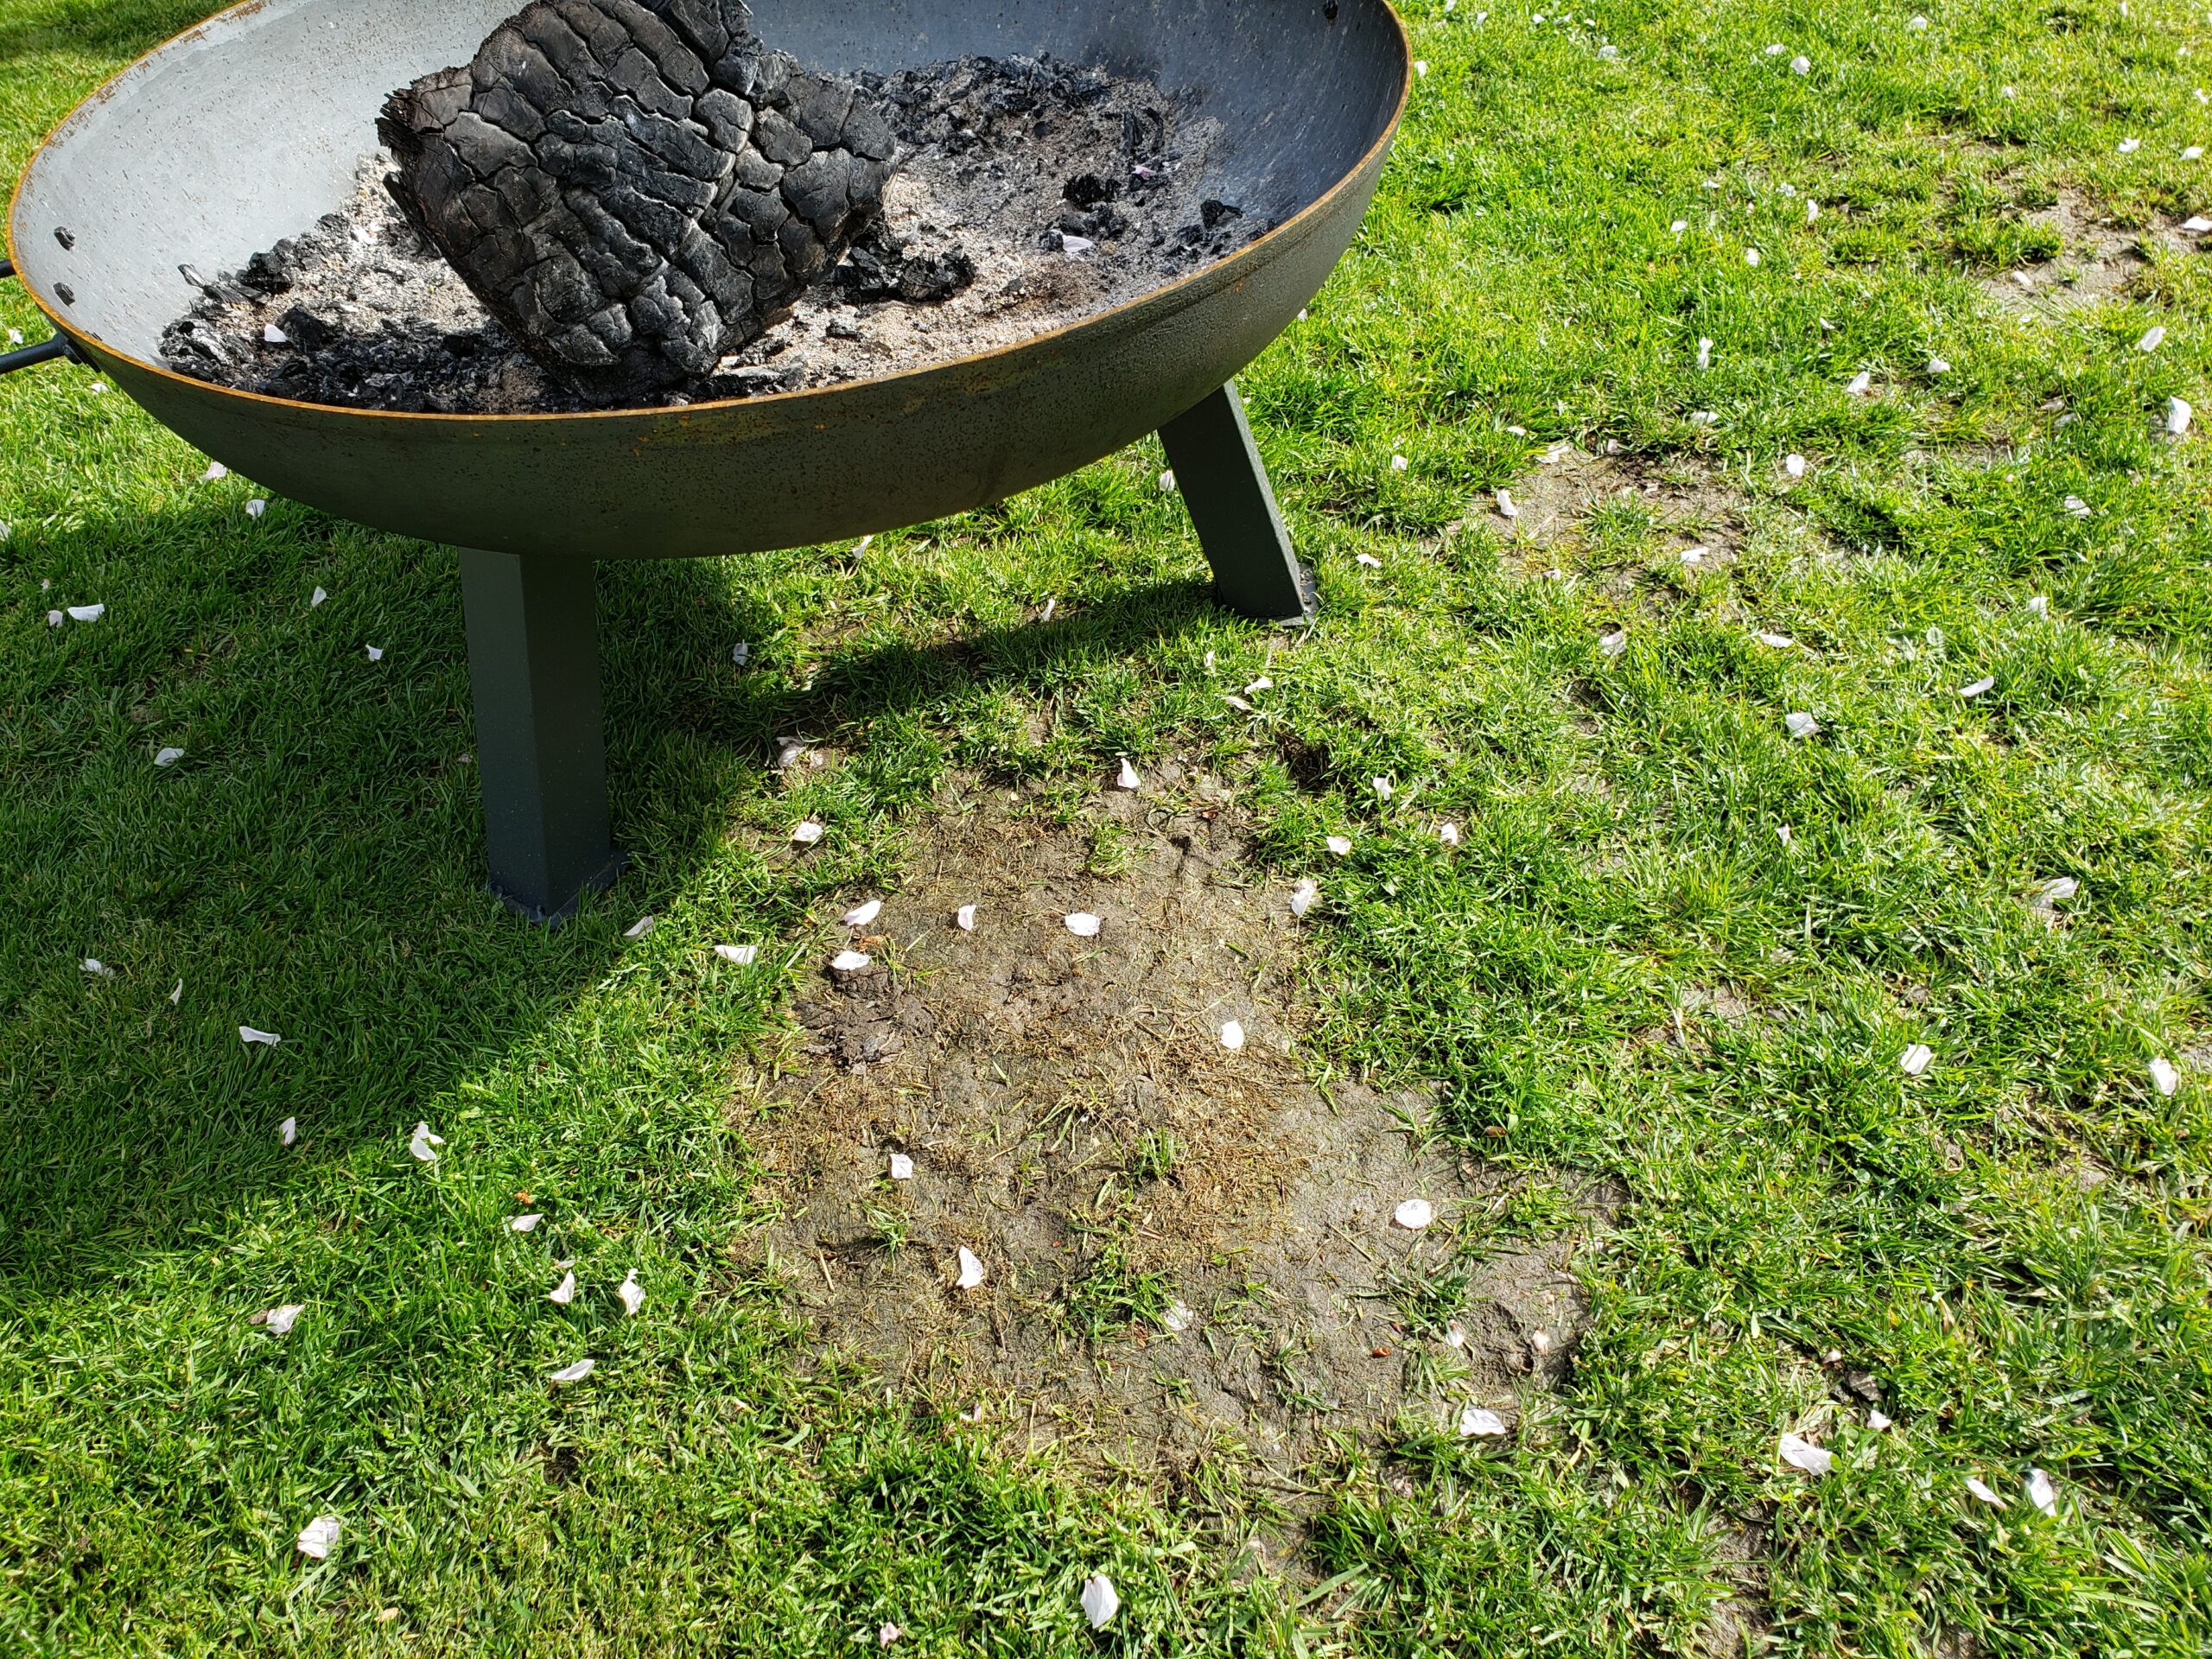 Fire Pit On Grass 5 Best Ways To, Can You Place Fire Pit On Grass